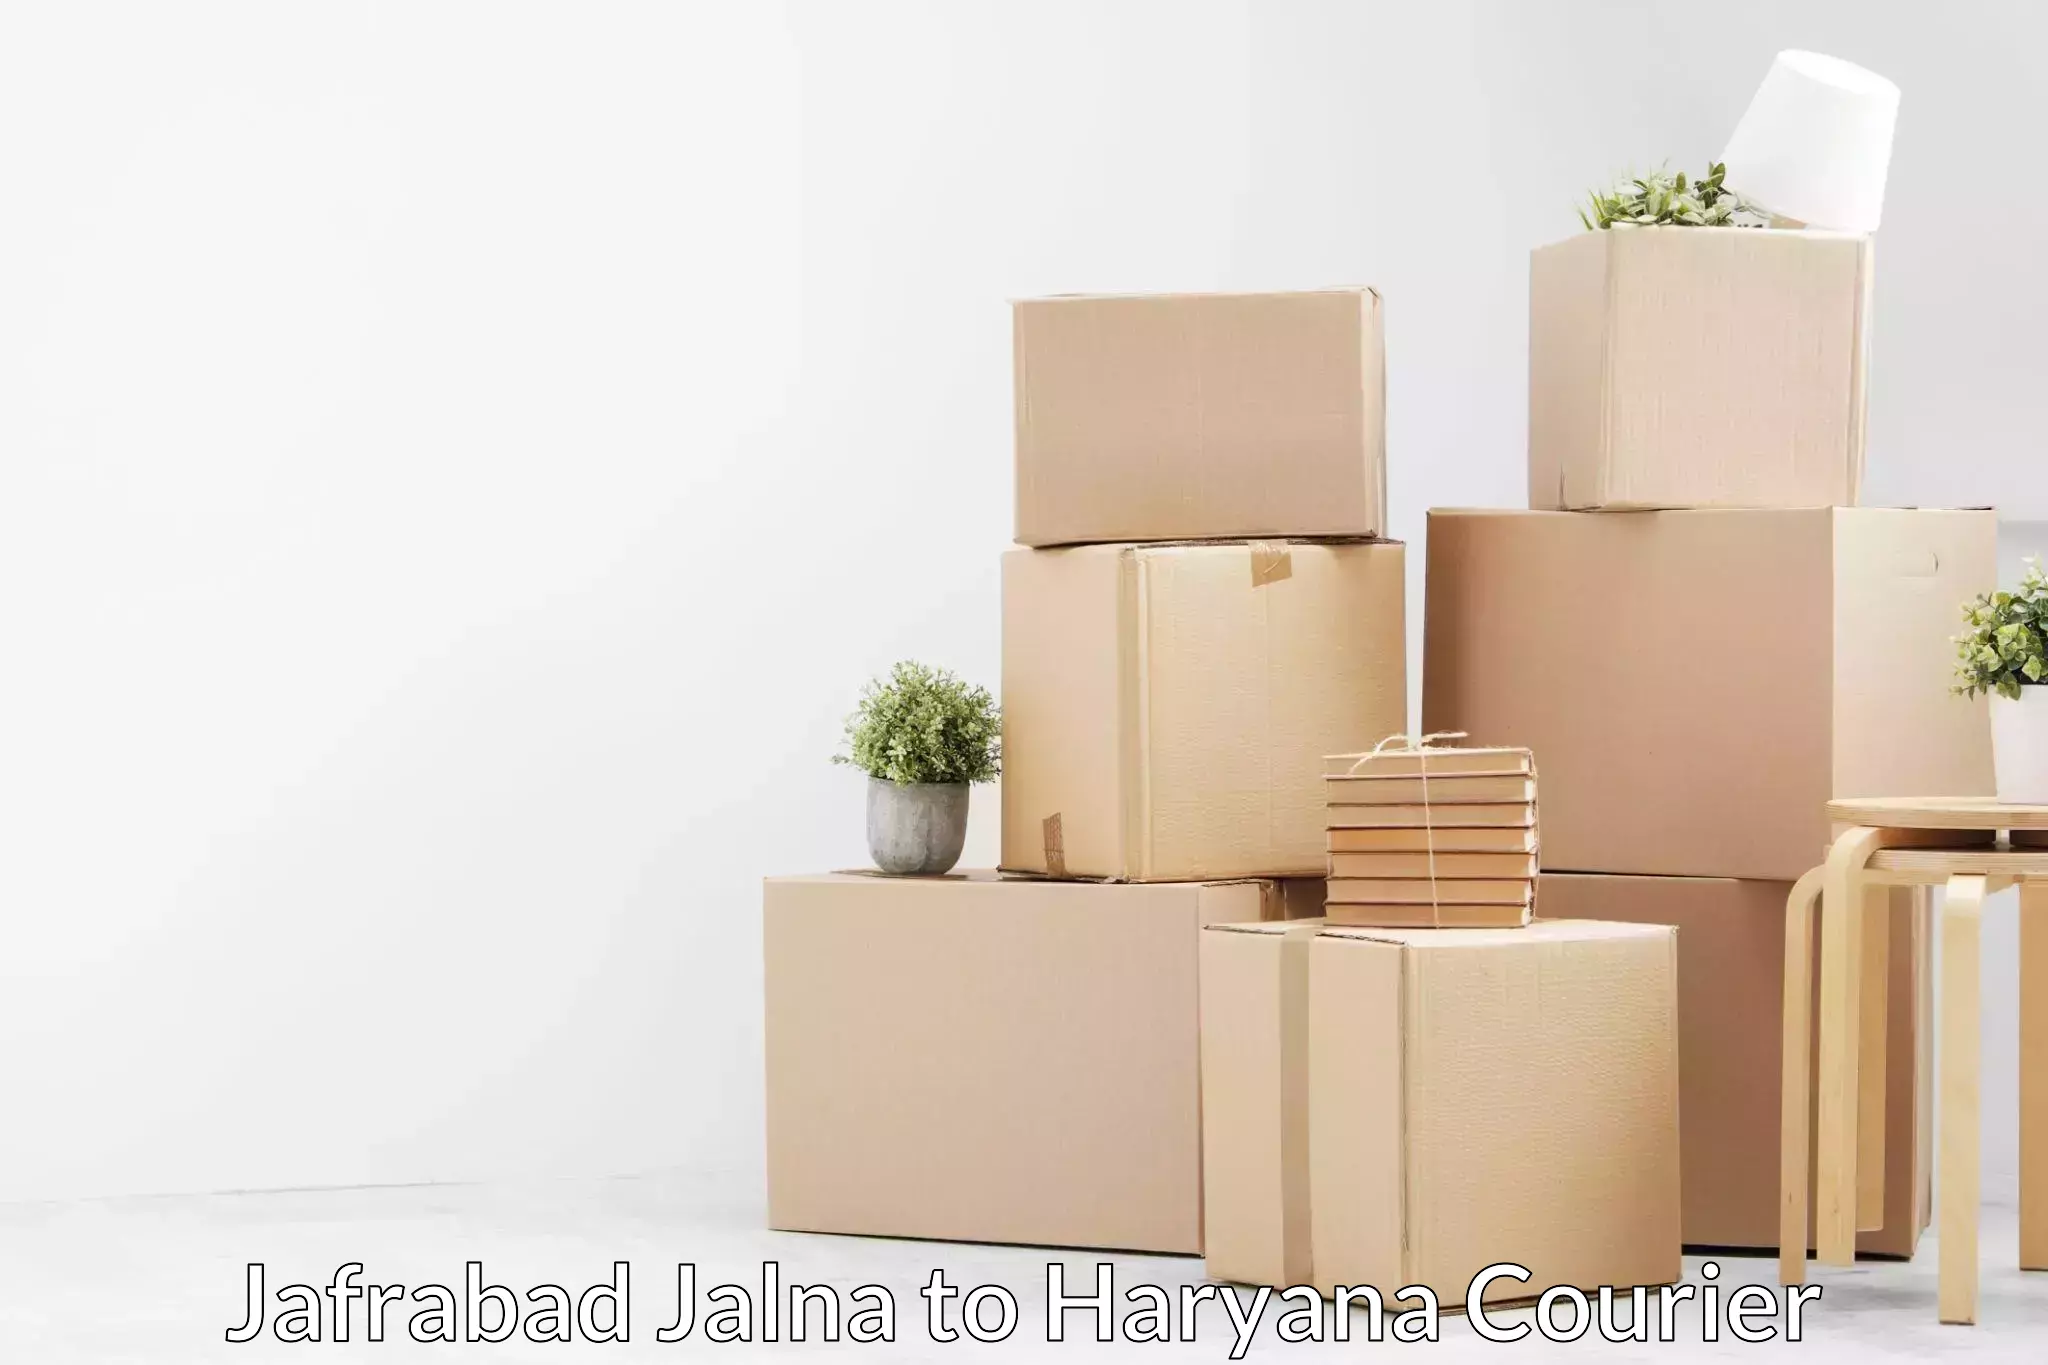 Professional packing services Jafrabad Jalna to Fatehabad